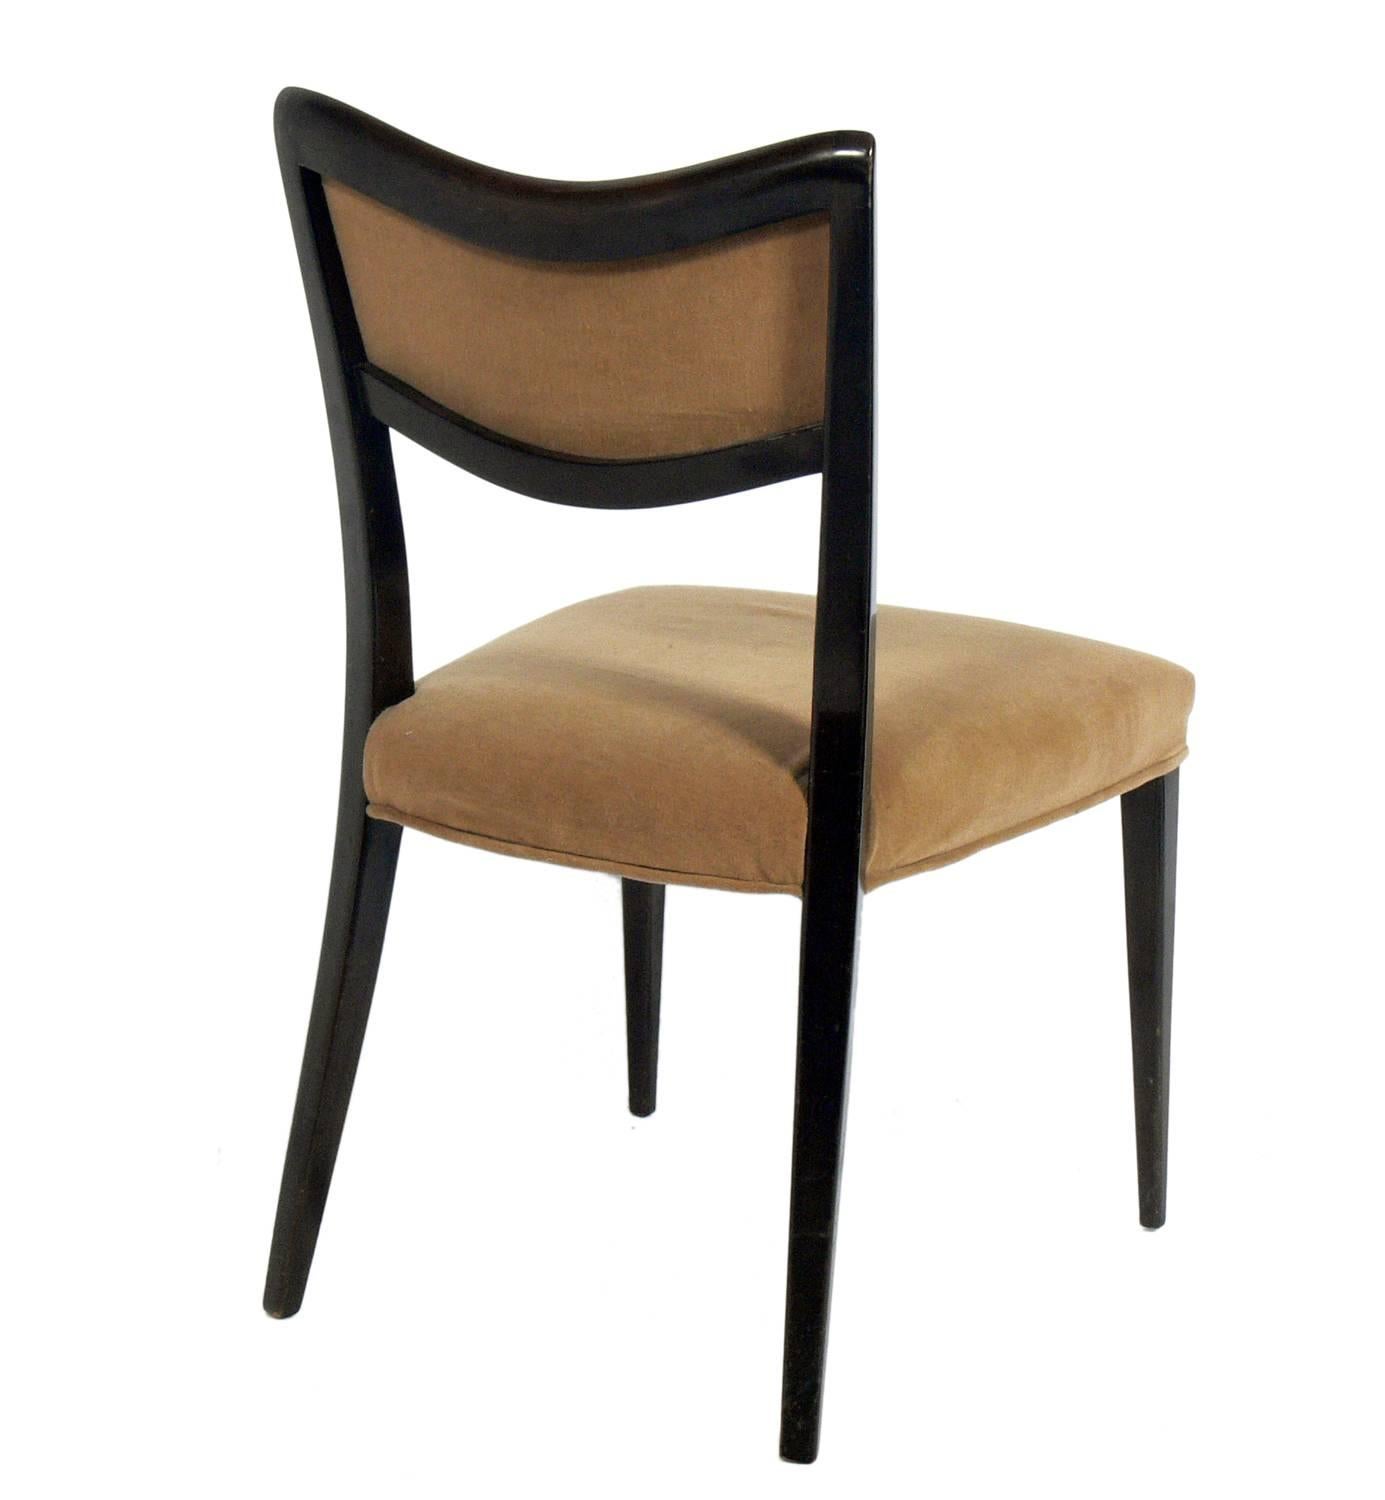 American Set of Four Curvaceous Dining Chairs by Harvey Probber